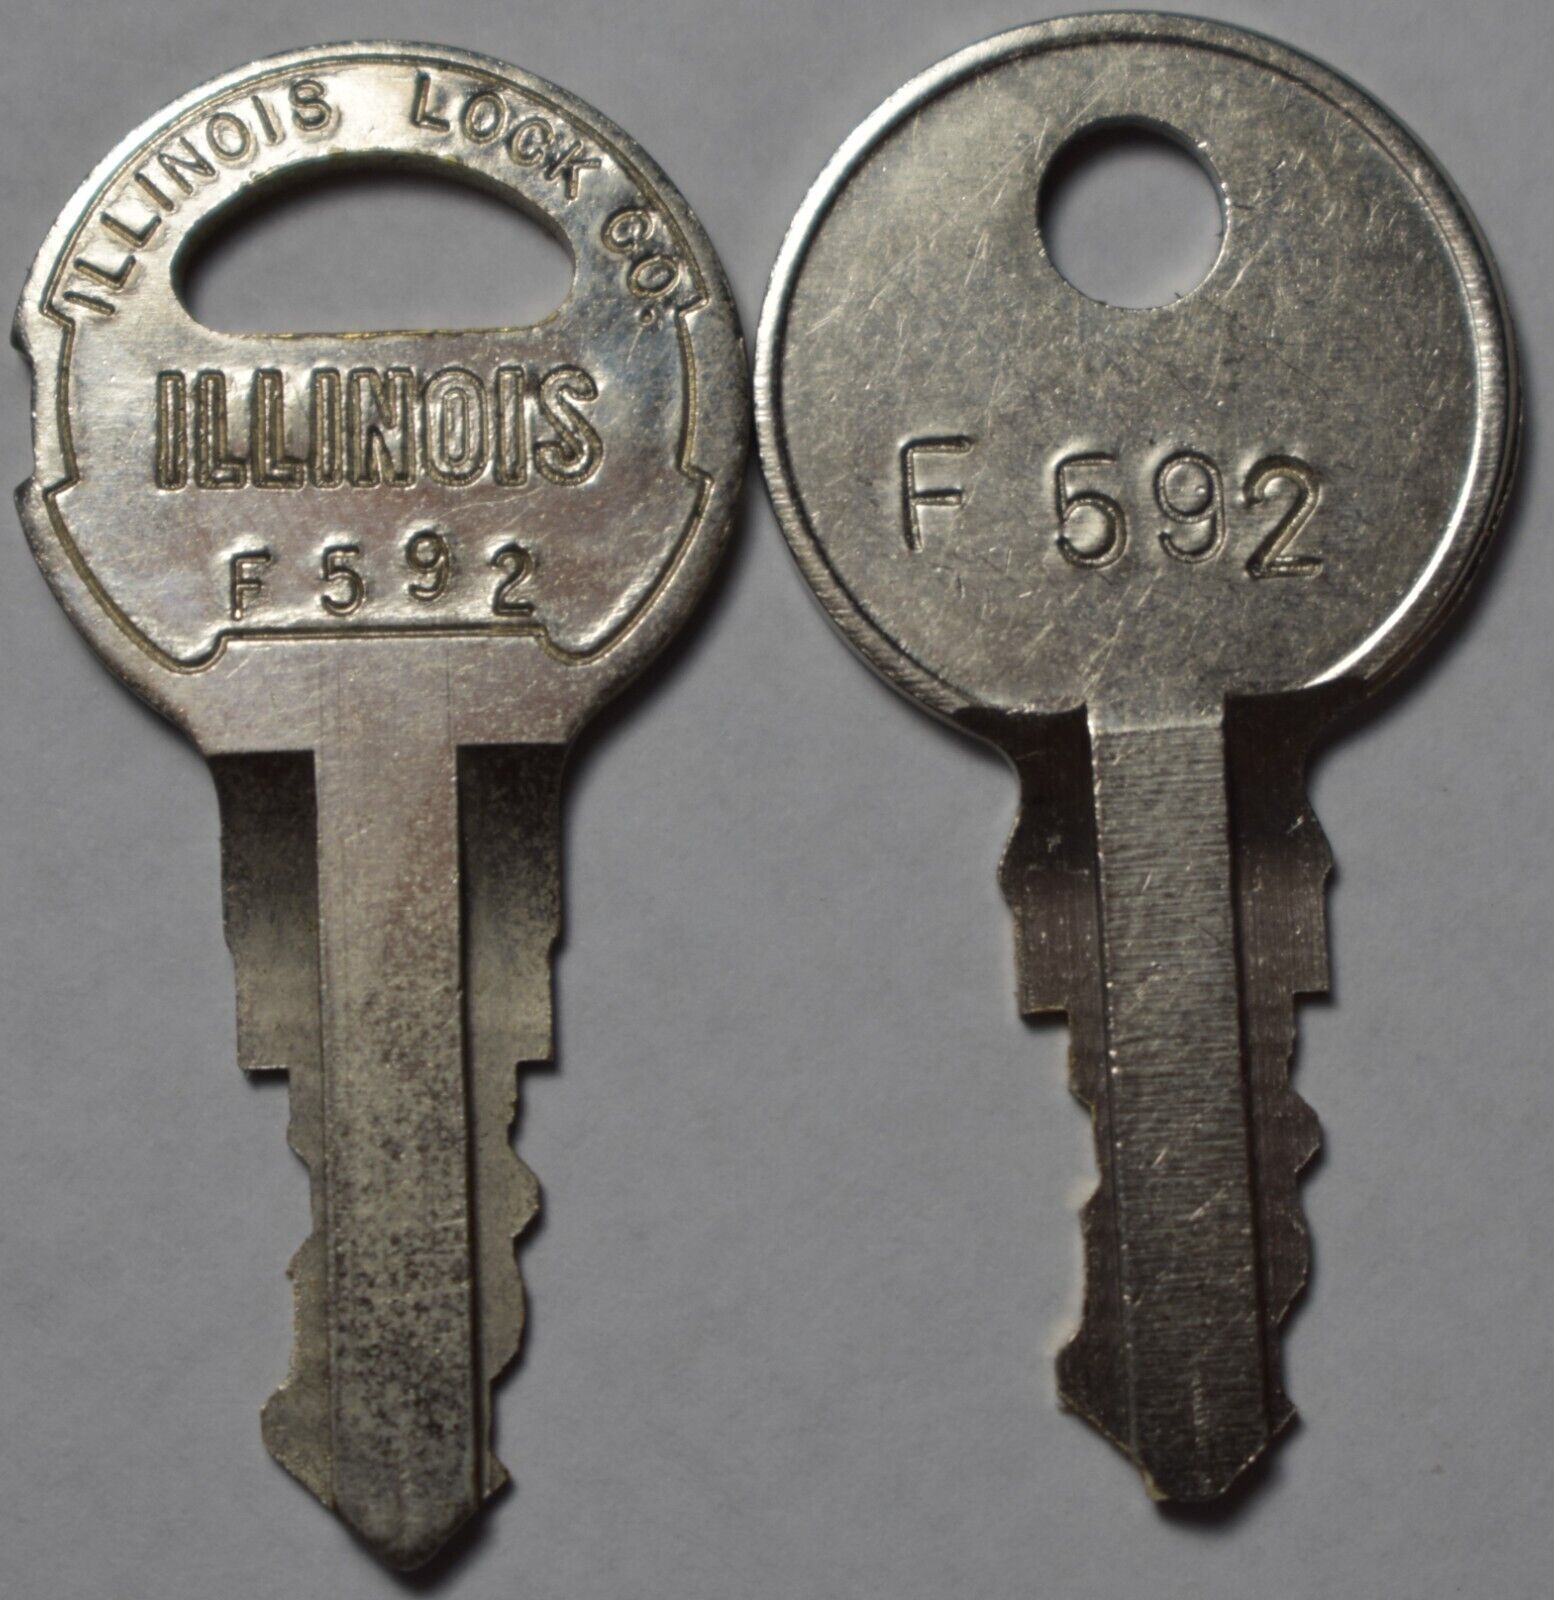 RockOla F592 Cabinet Key For Models 1455 (some) 1458-1497, All 435 through 460